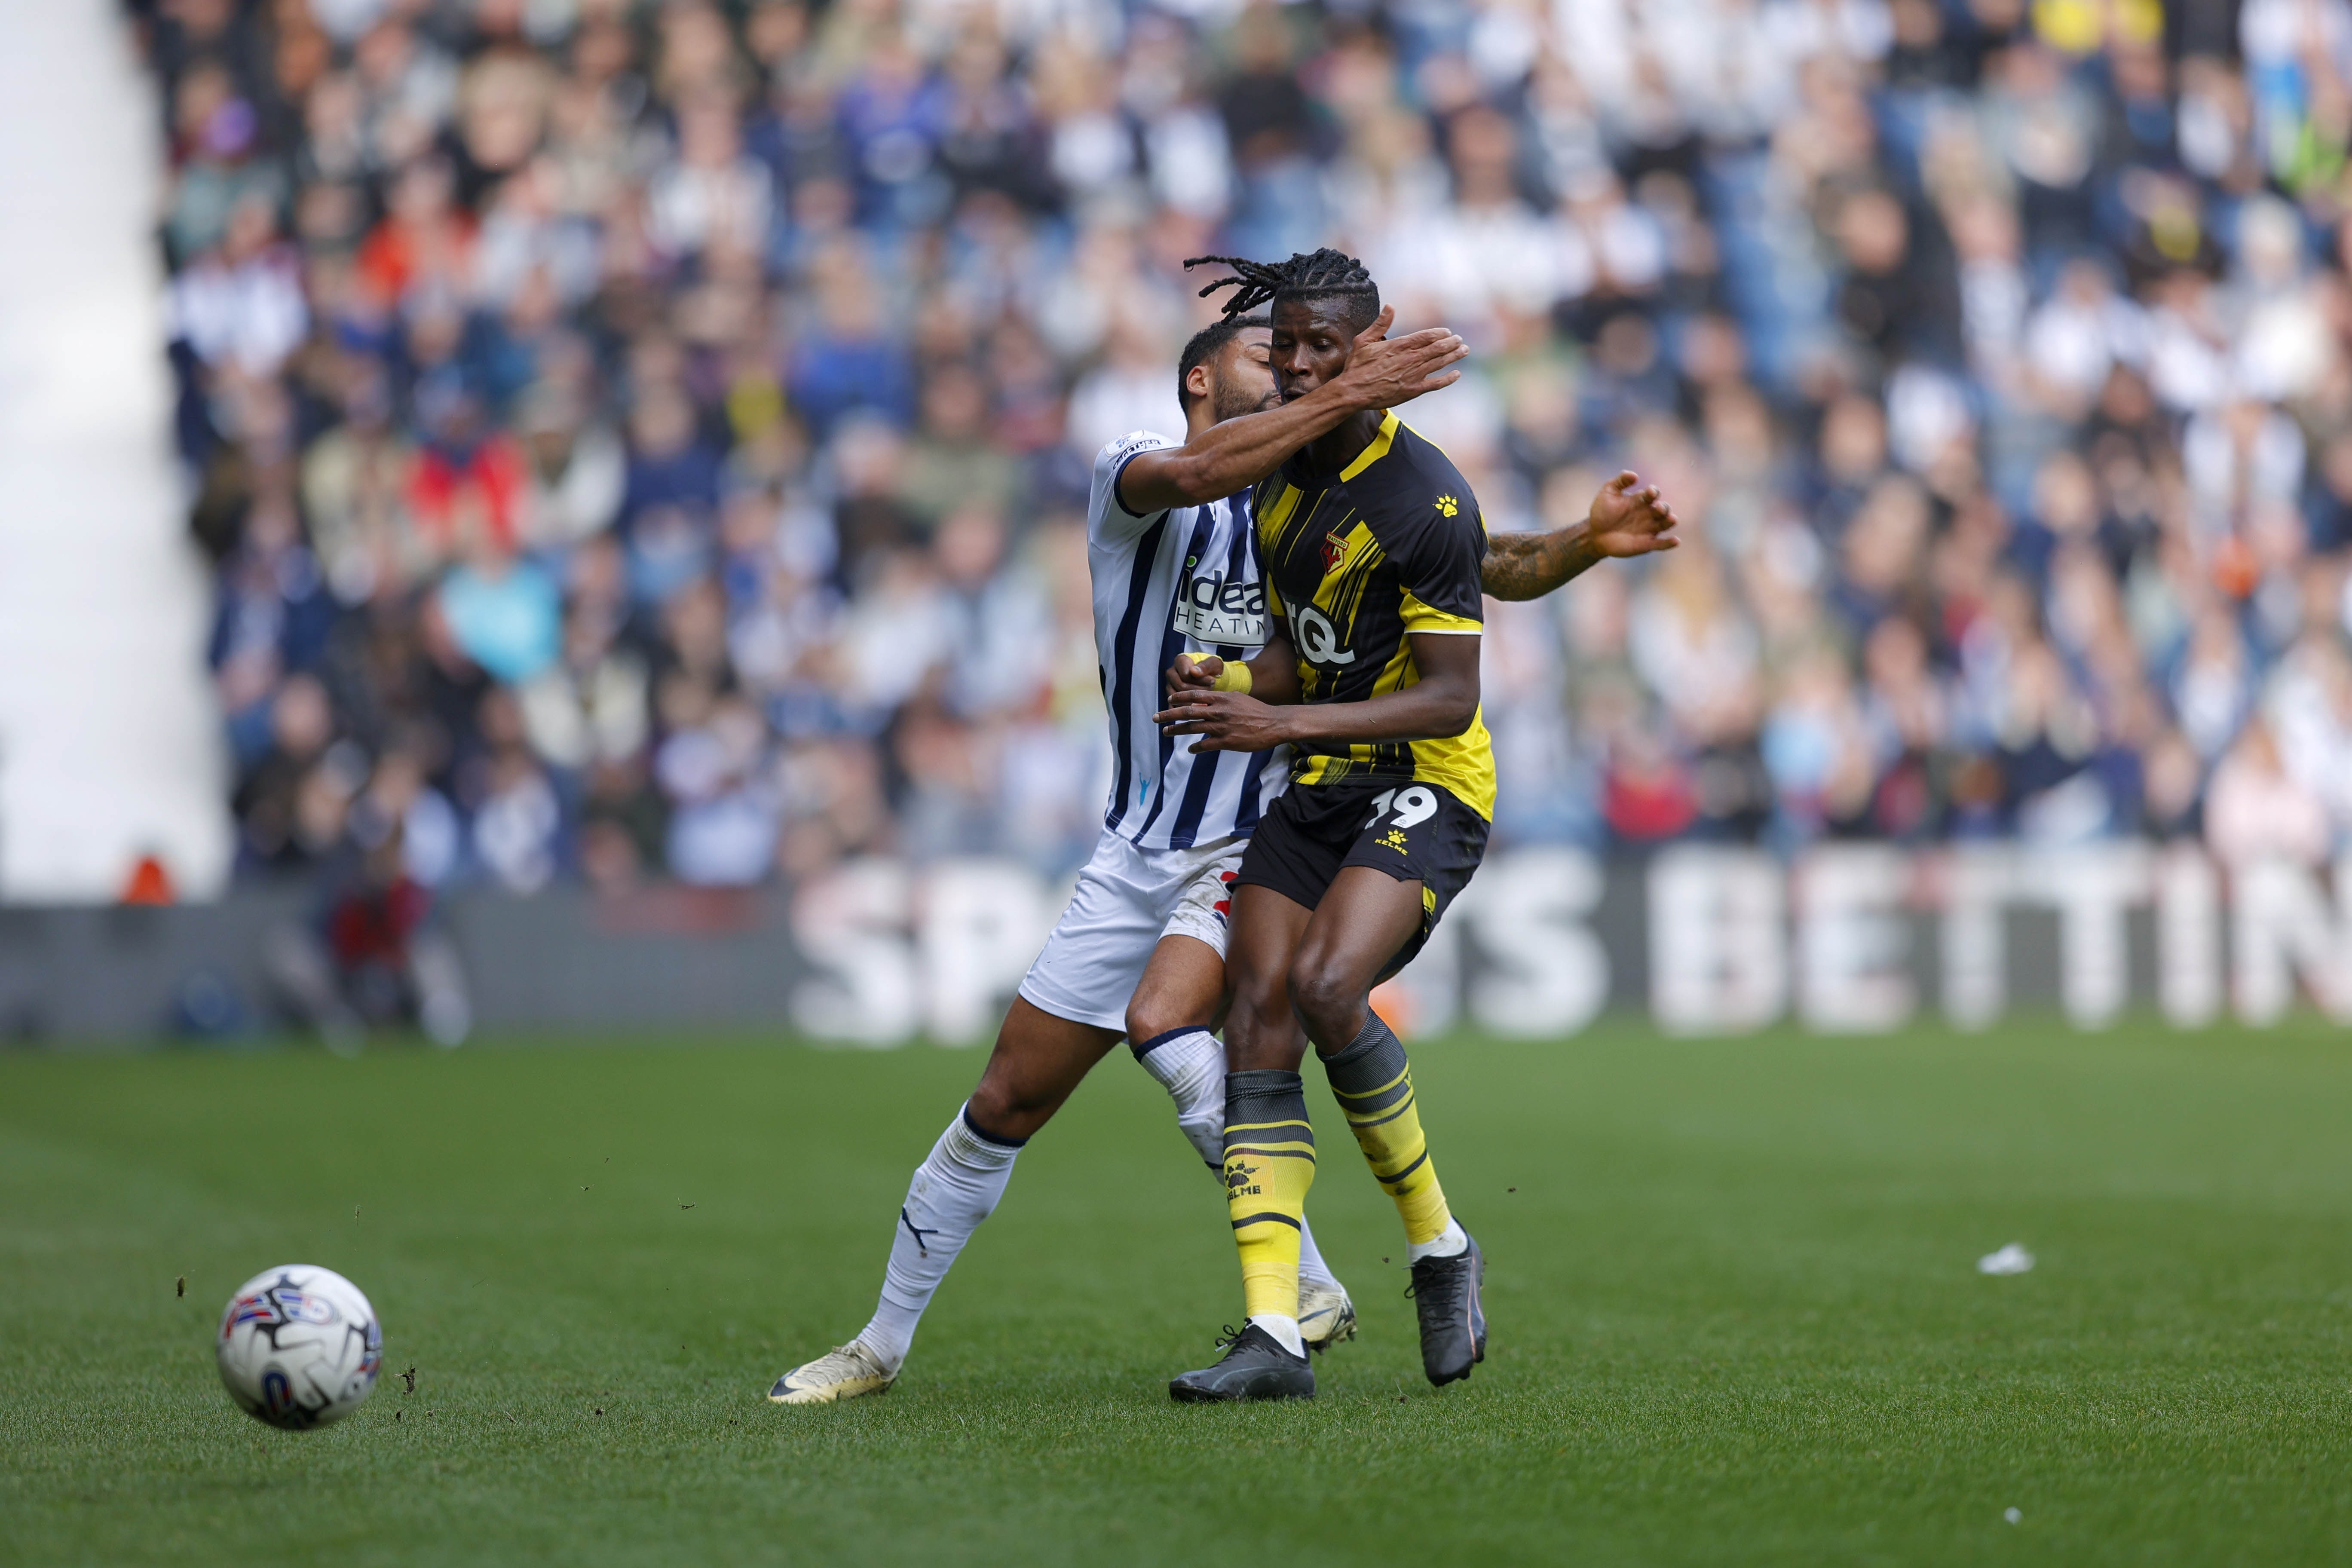 Darnell Furlong collides with a Watford player